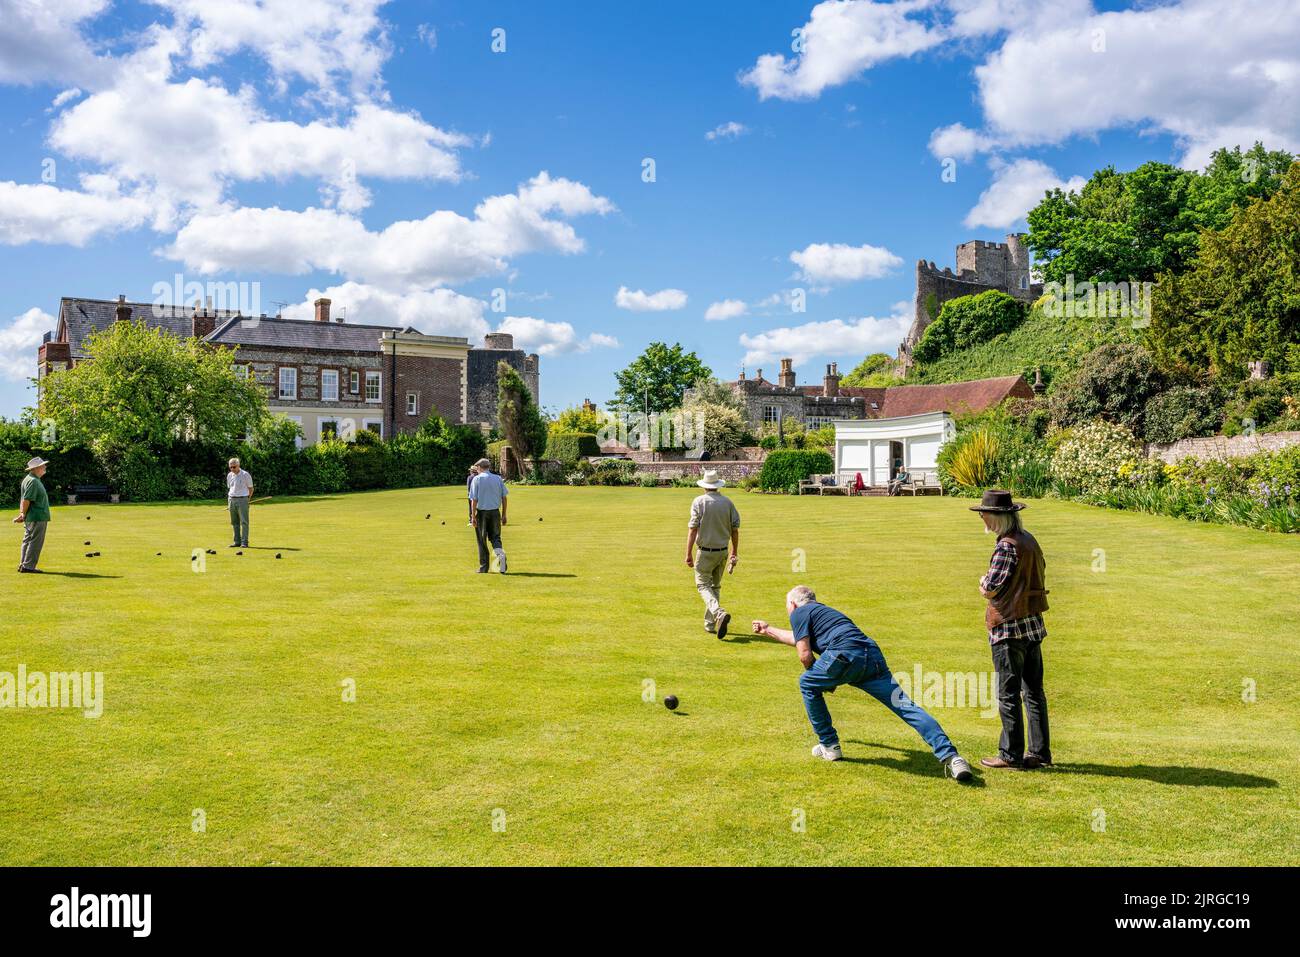 Local Men Play A Traditional Type Of Bowls That Was Played In The Middle Ages, Lewes, East Sussex, UK. Stock Photo